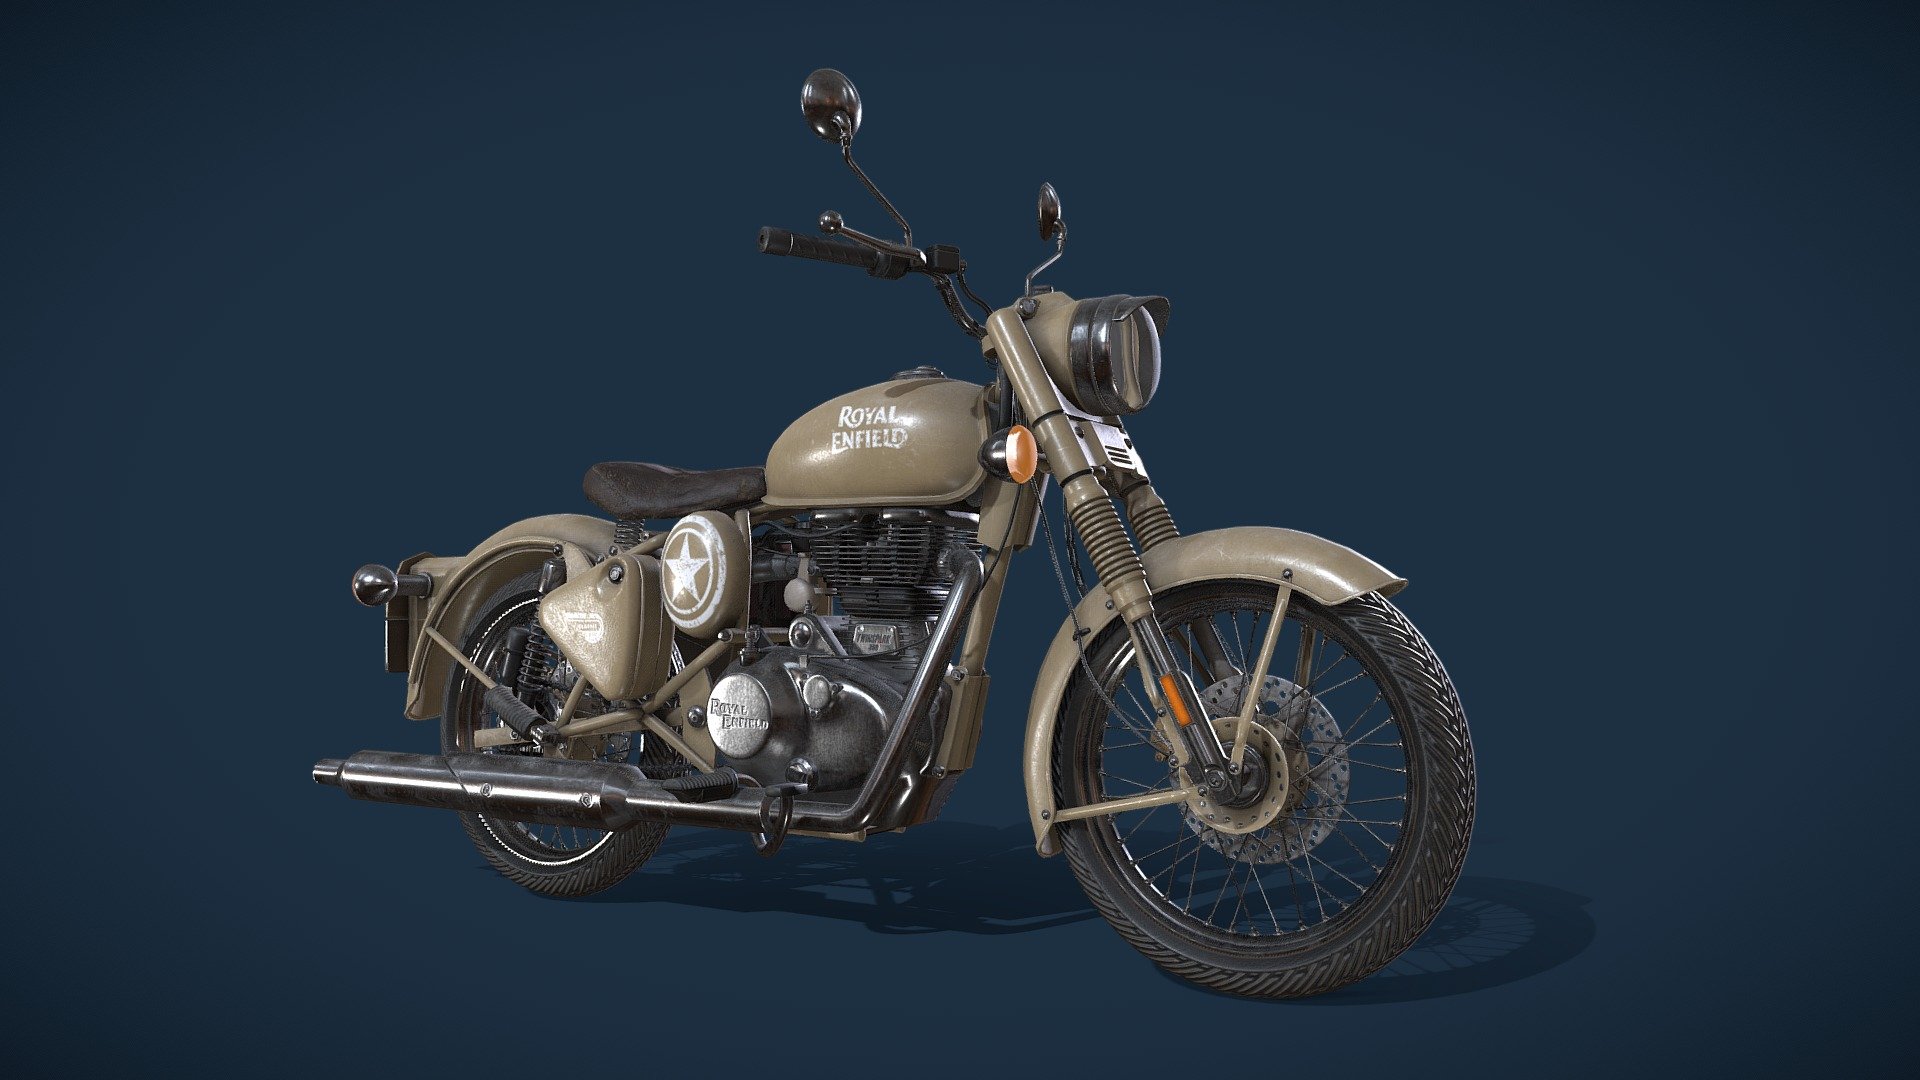 A model of the Royal Enfield, more accuratly the 350 classic model. Took some time to finish it since It was my first motorcycle model.
I'm very happy of the final result, I recommend the artstation page for more renders.

131k tris
5 maps of 4k - Royal Enfield - Classic 350 - 3D model by adriendigiovanni 3d model